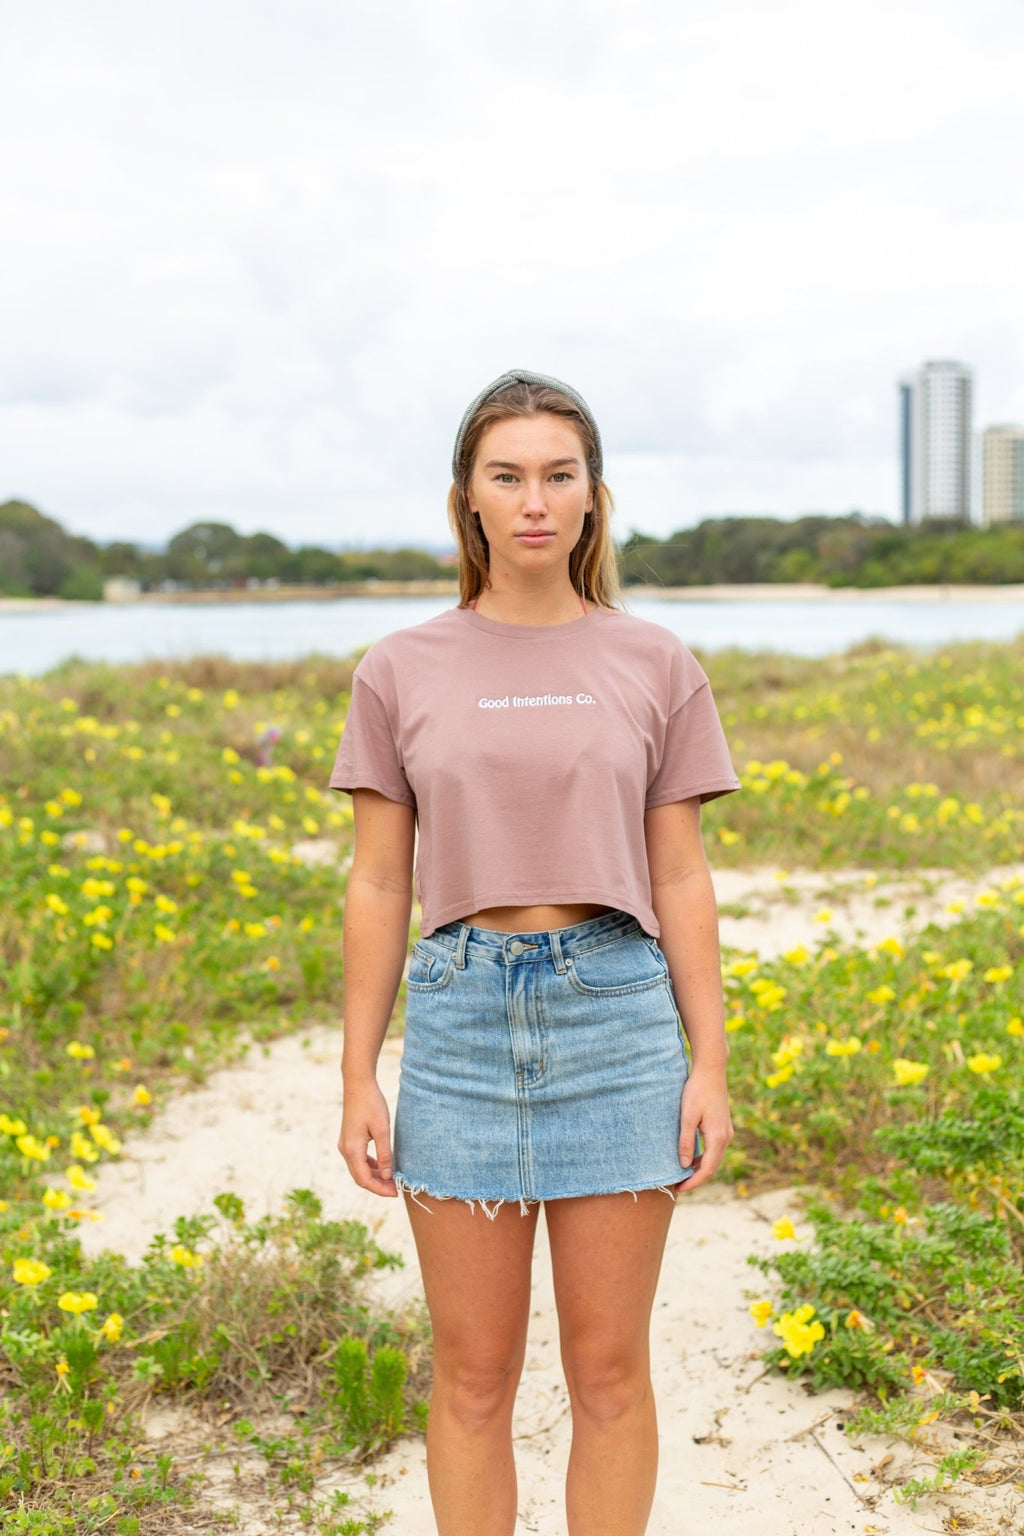 Woman wearing Hazy Pink crop top with a white embroidery design on it